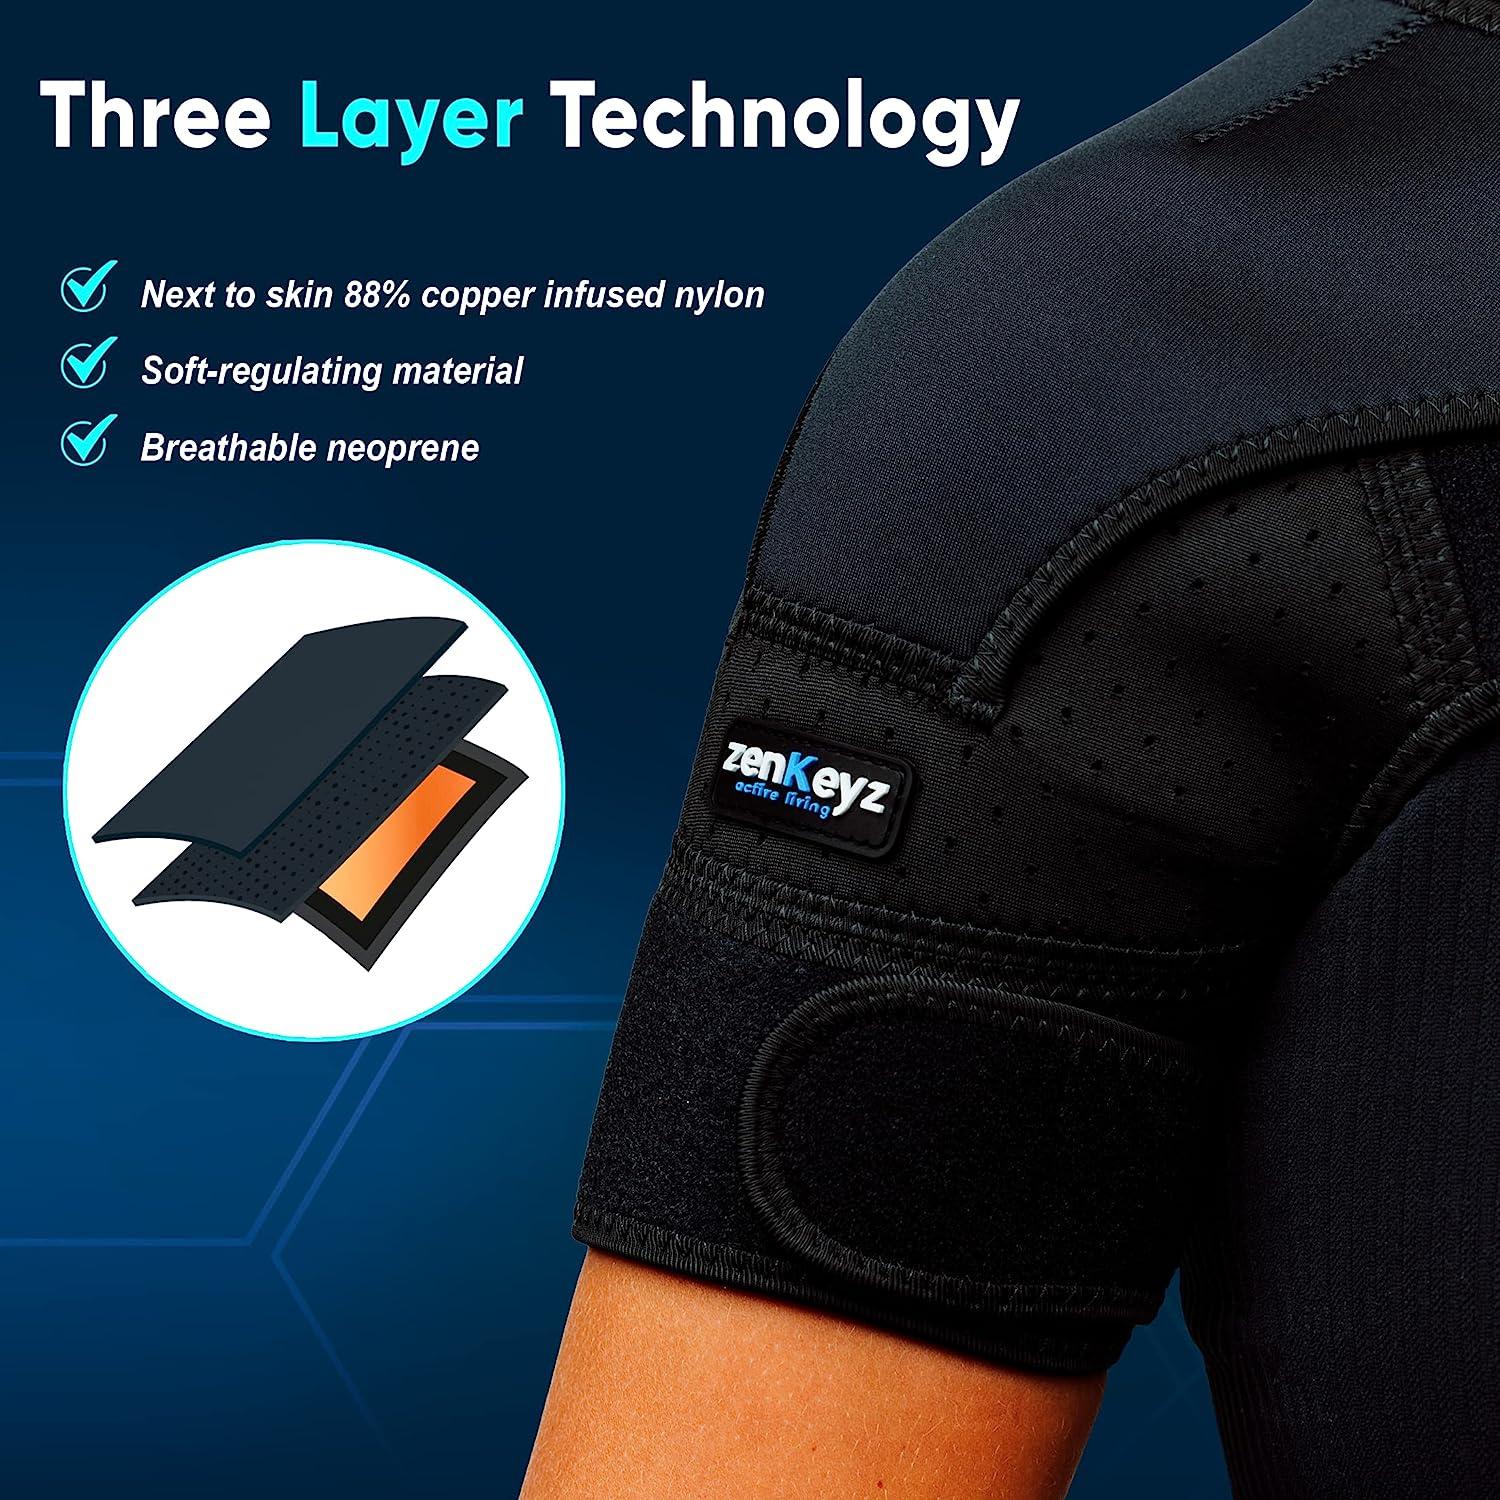 Copper Compression Recovery Shoulder Brace